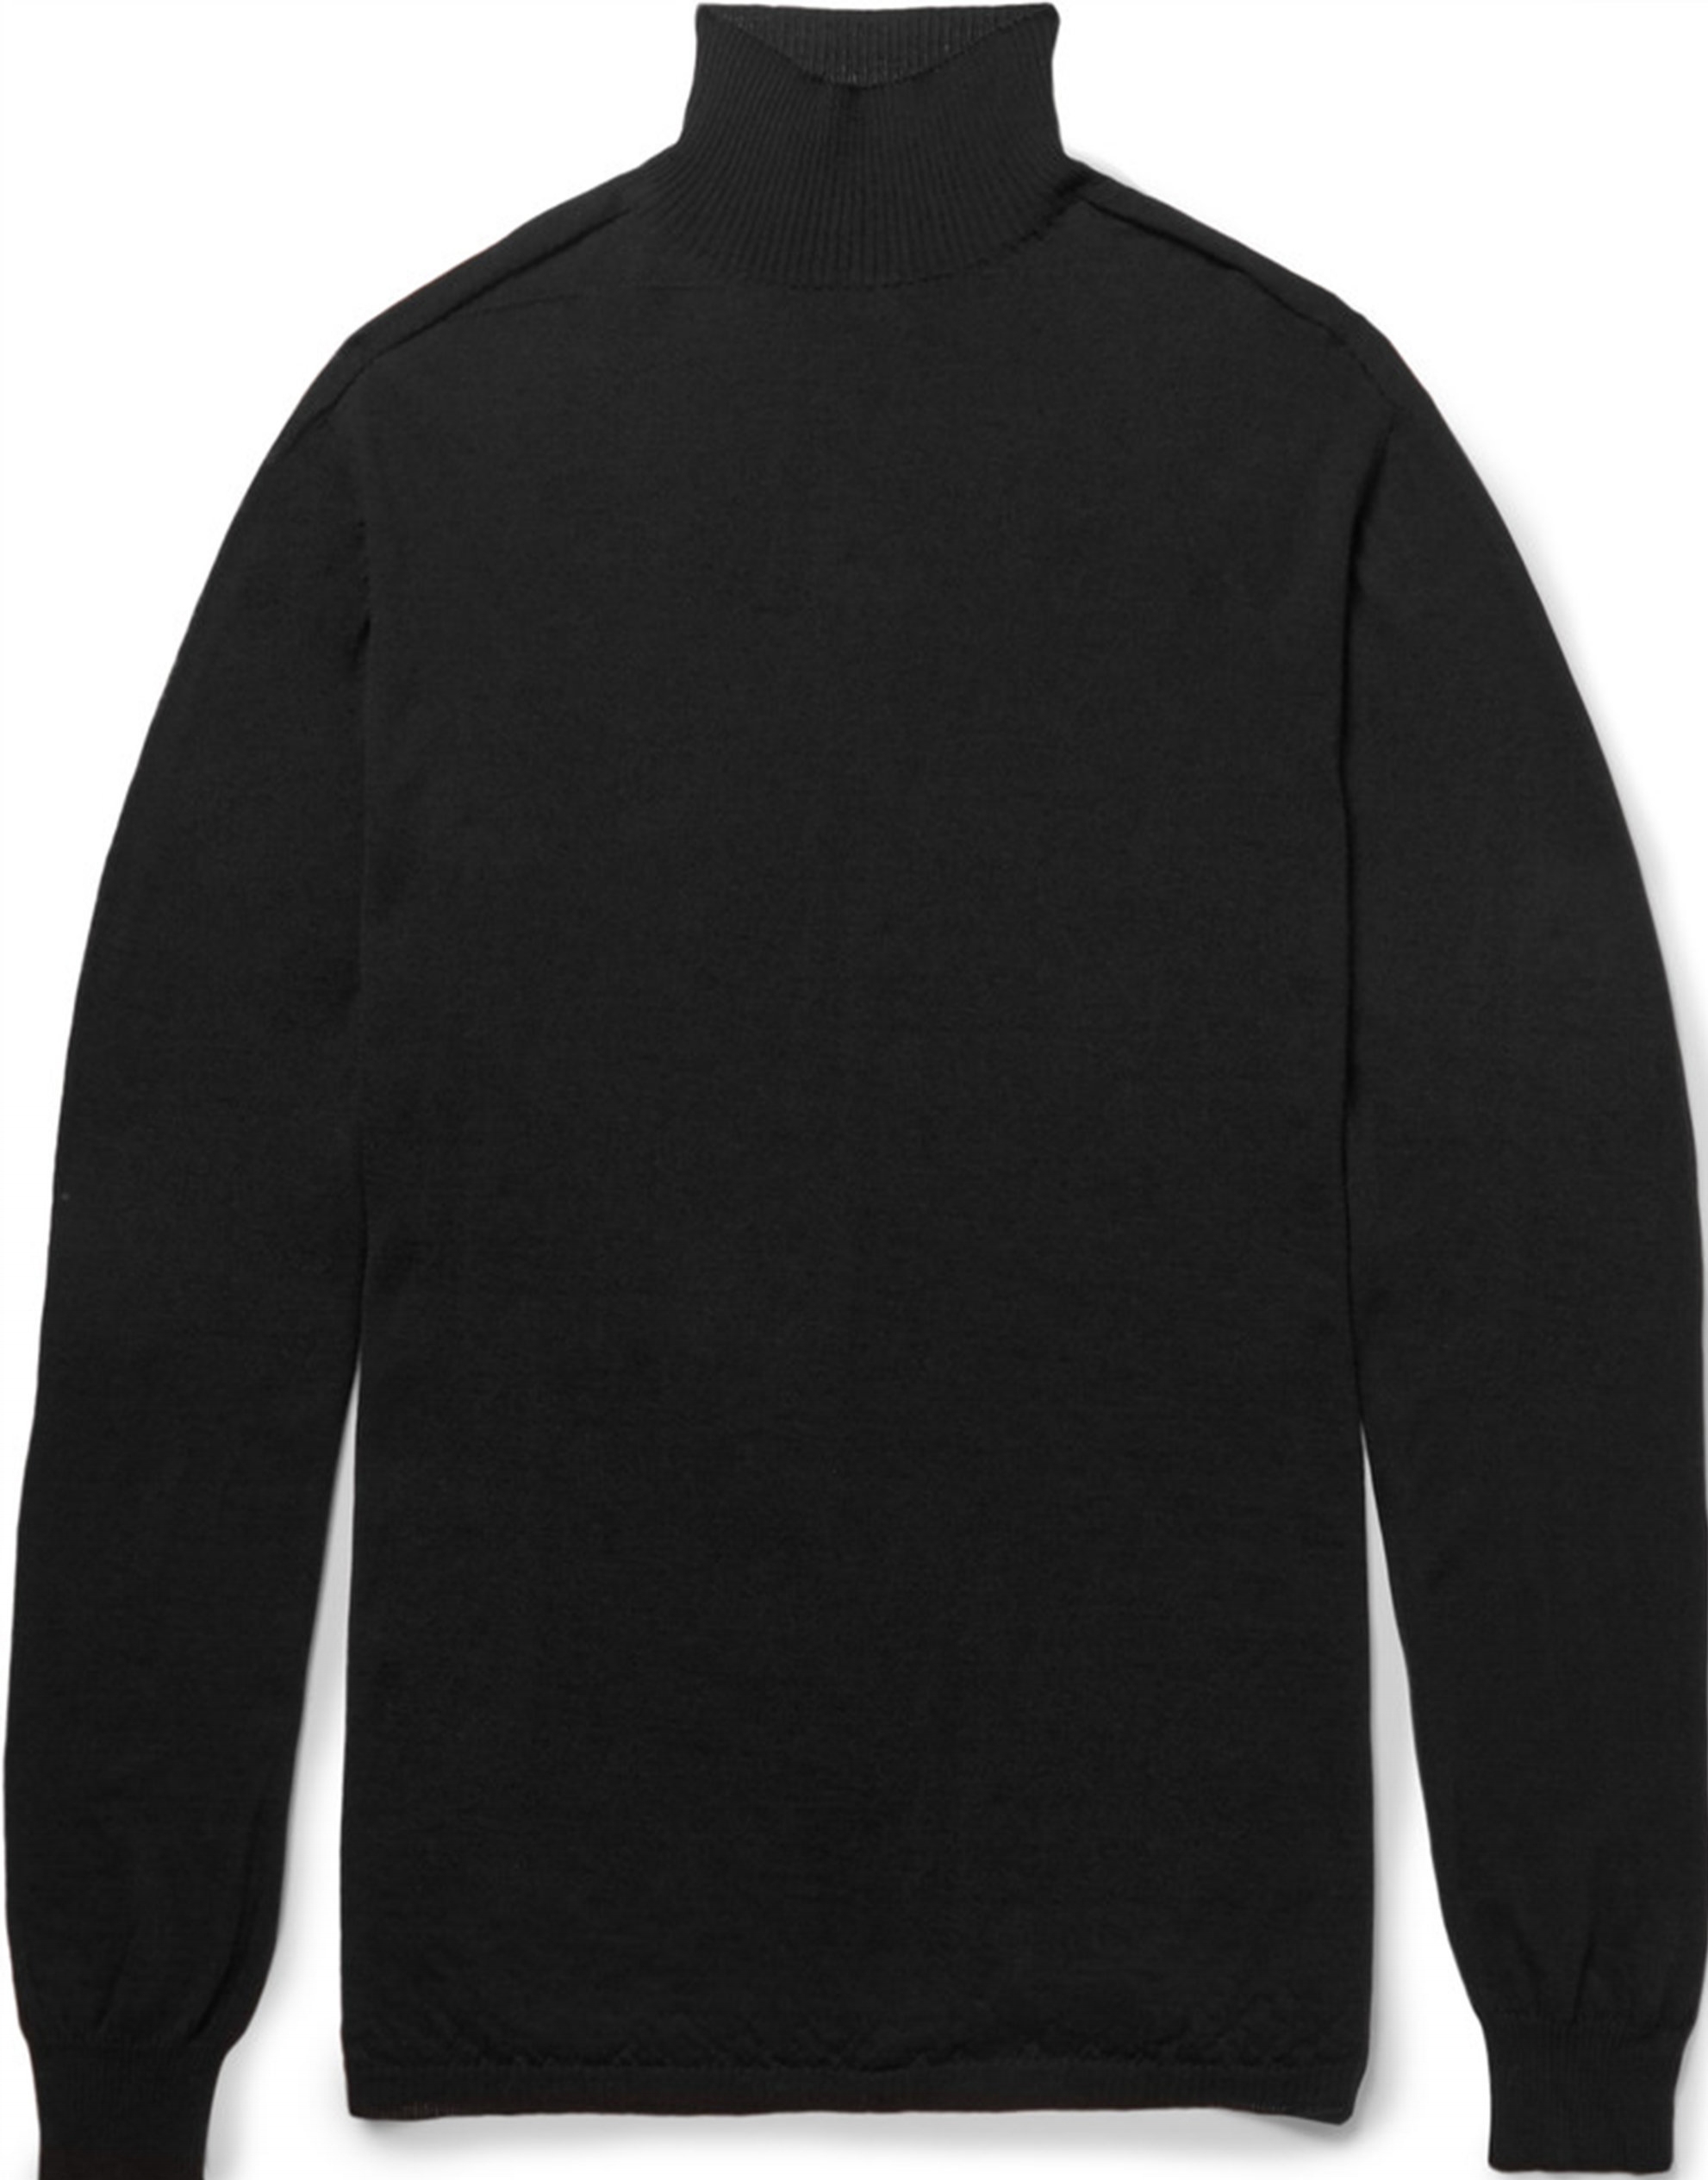 Rick Owens Oversized Wool Rollneck Sweater at Mr. Porter, $550